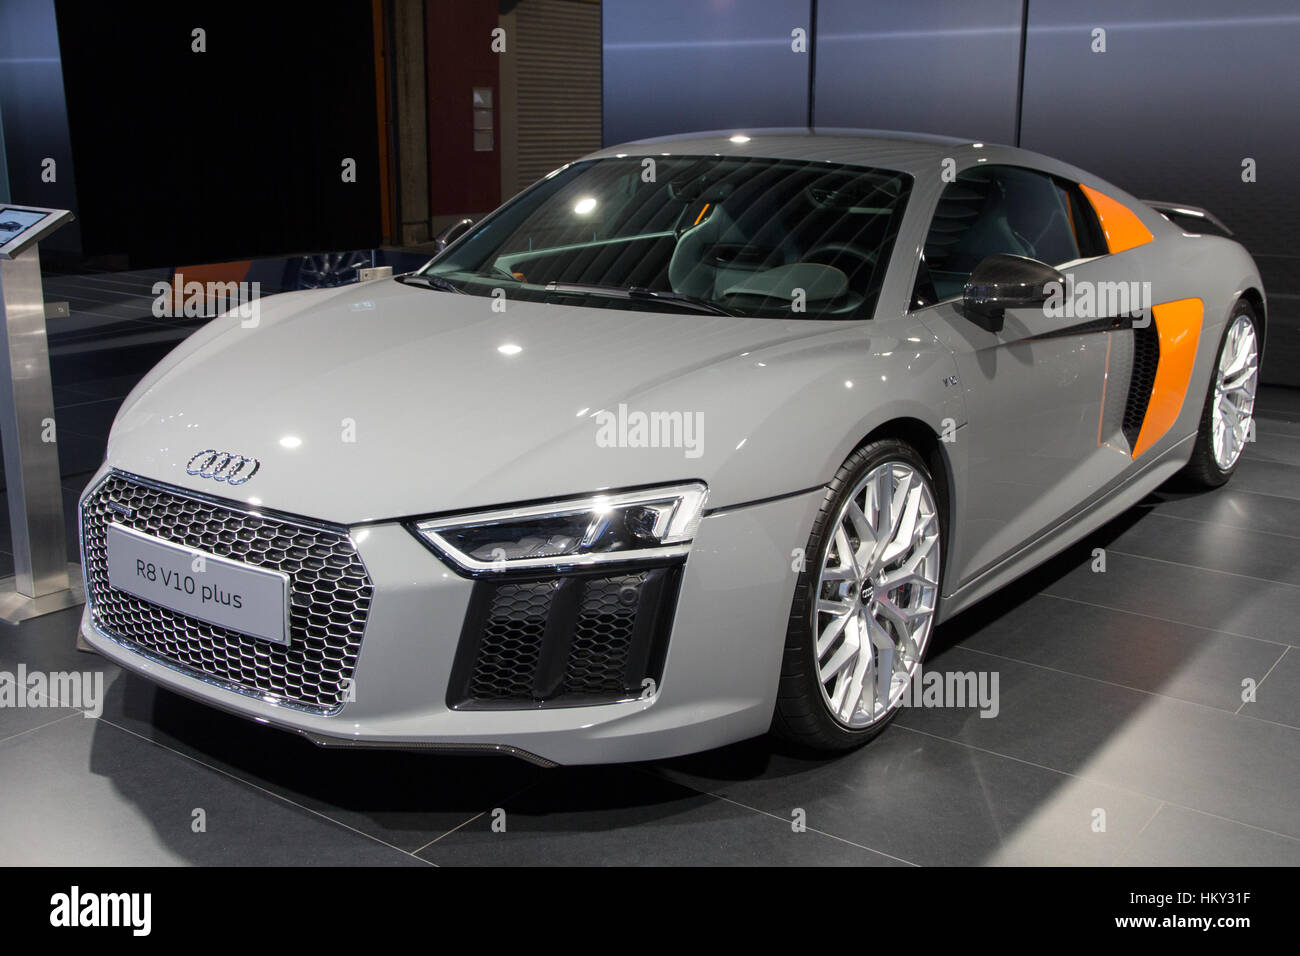 BRUSSELS - JAN 12, 2016: Audi R8 V10 Plus on display at the Brussels Motor Show. Stock Photo